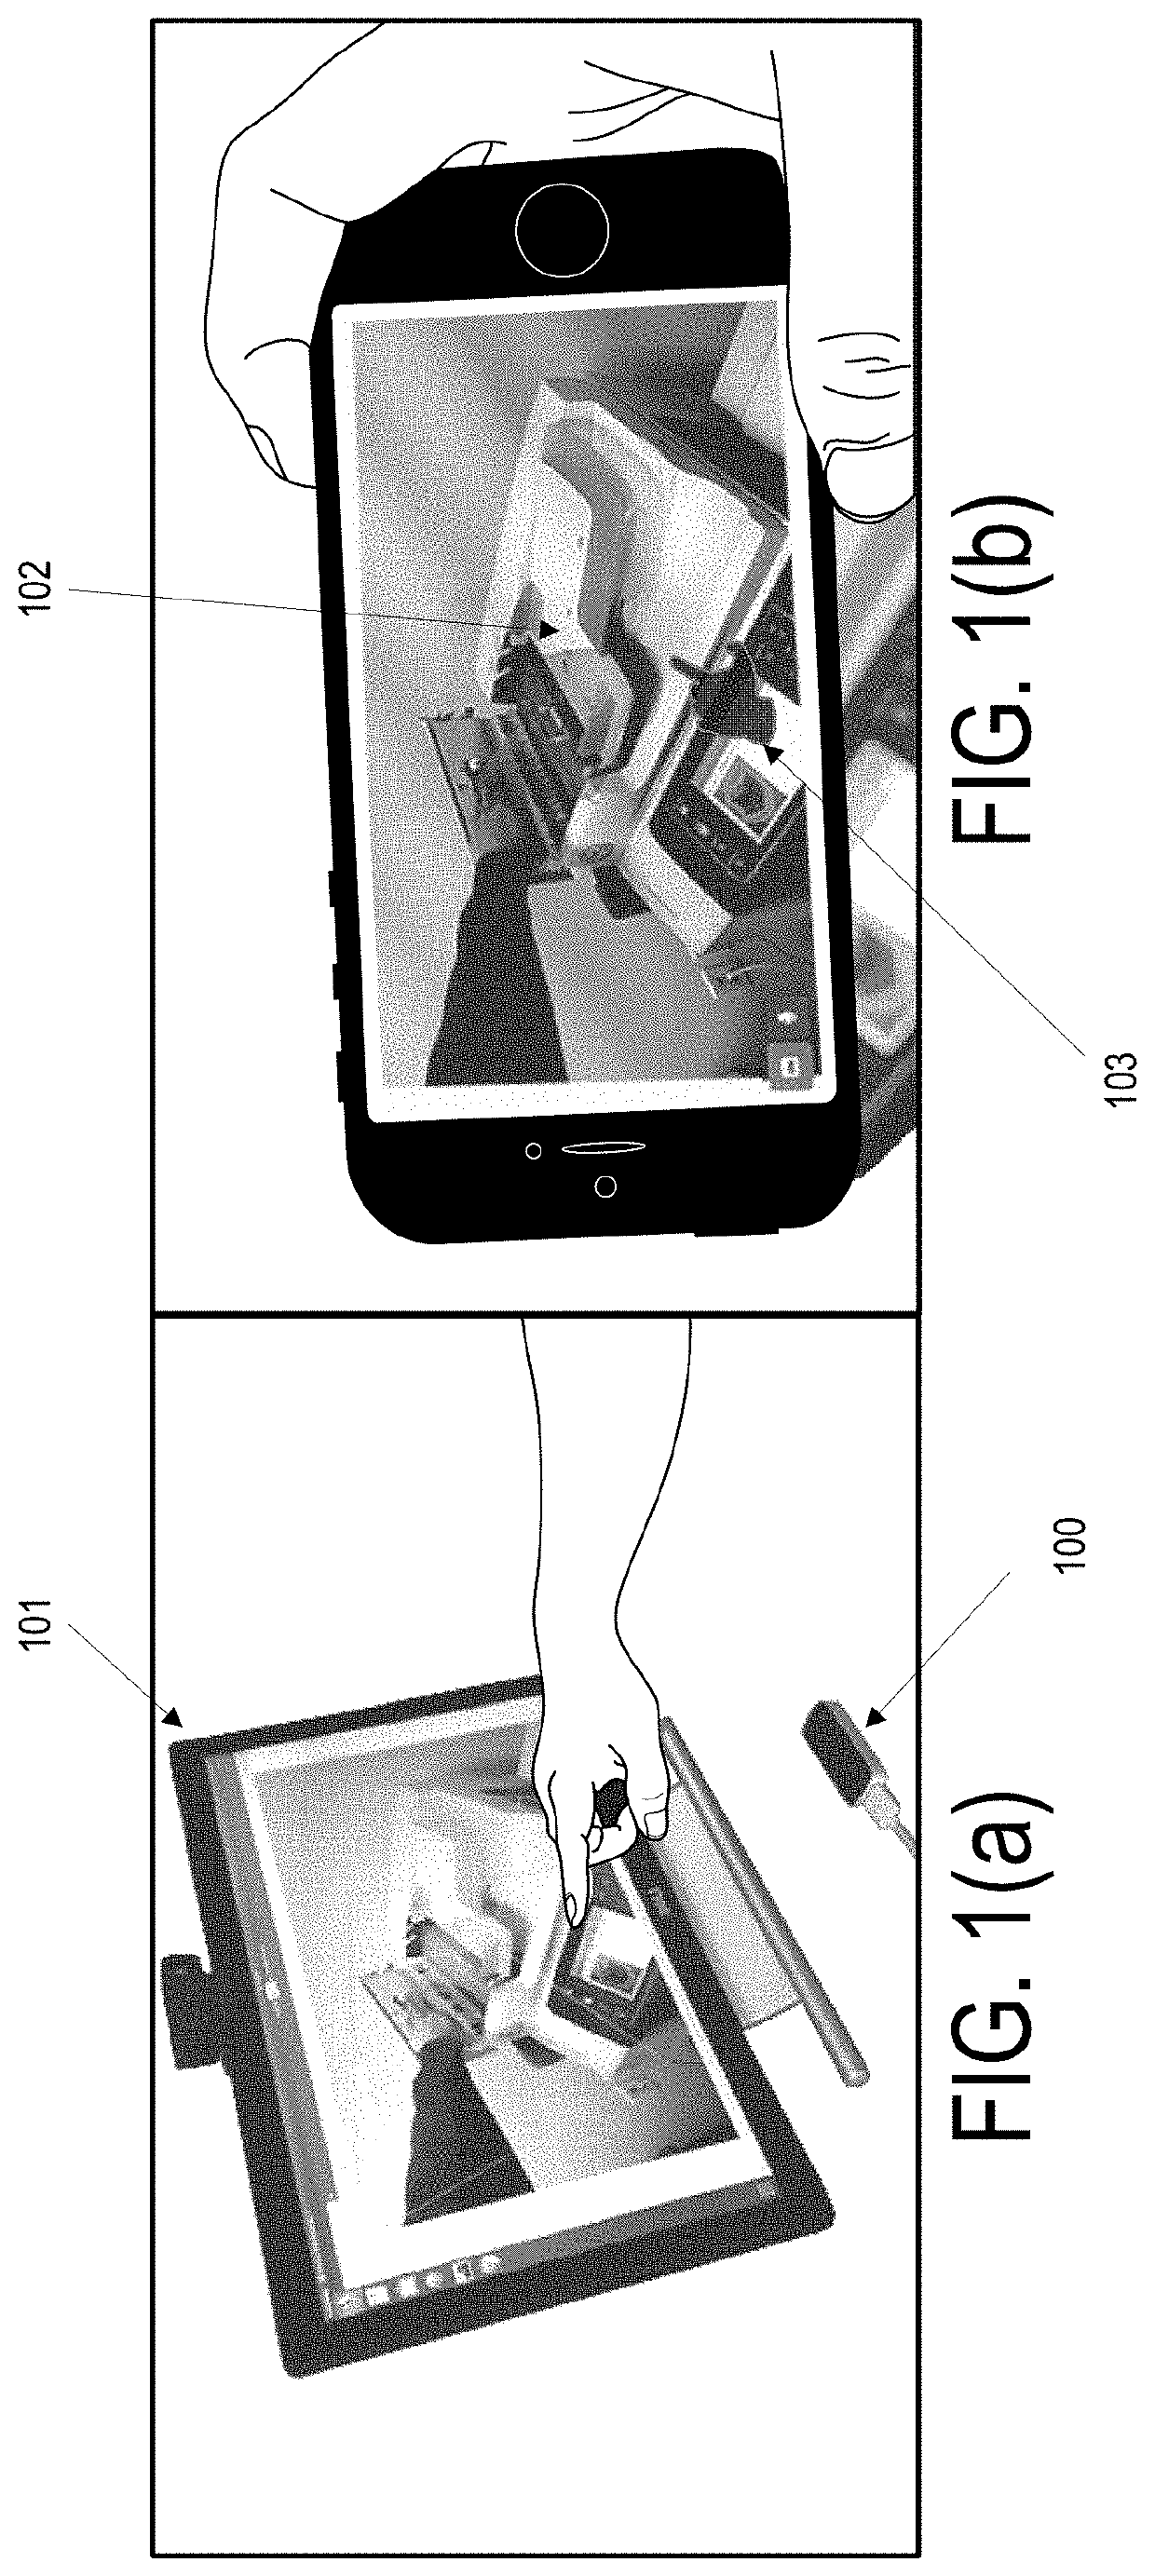 Web-based remote assistance system with context & content-aware 3D hand gesture visualization